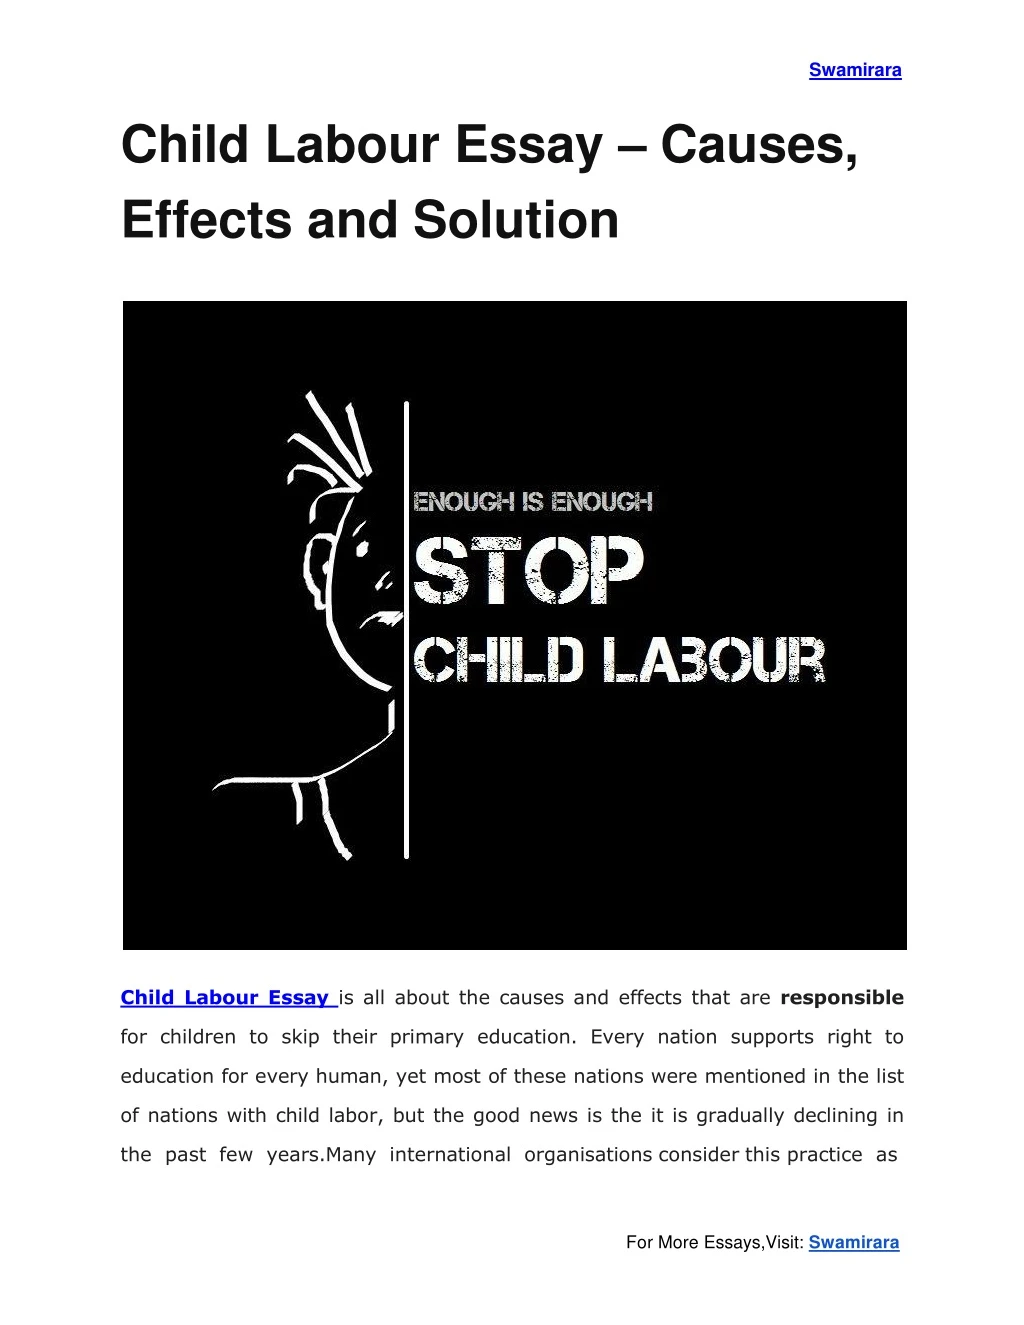 child labour essay causes effects and solution